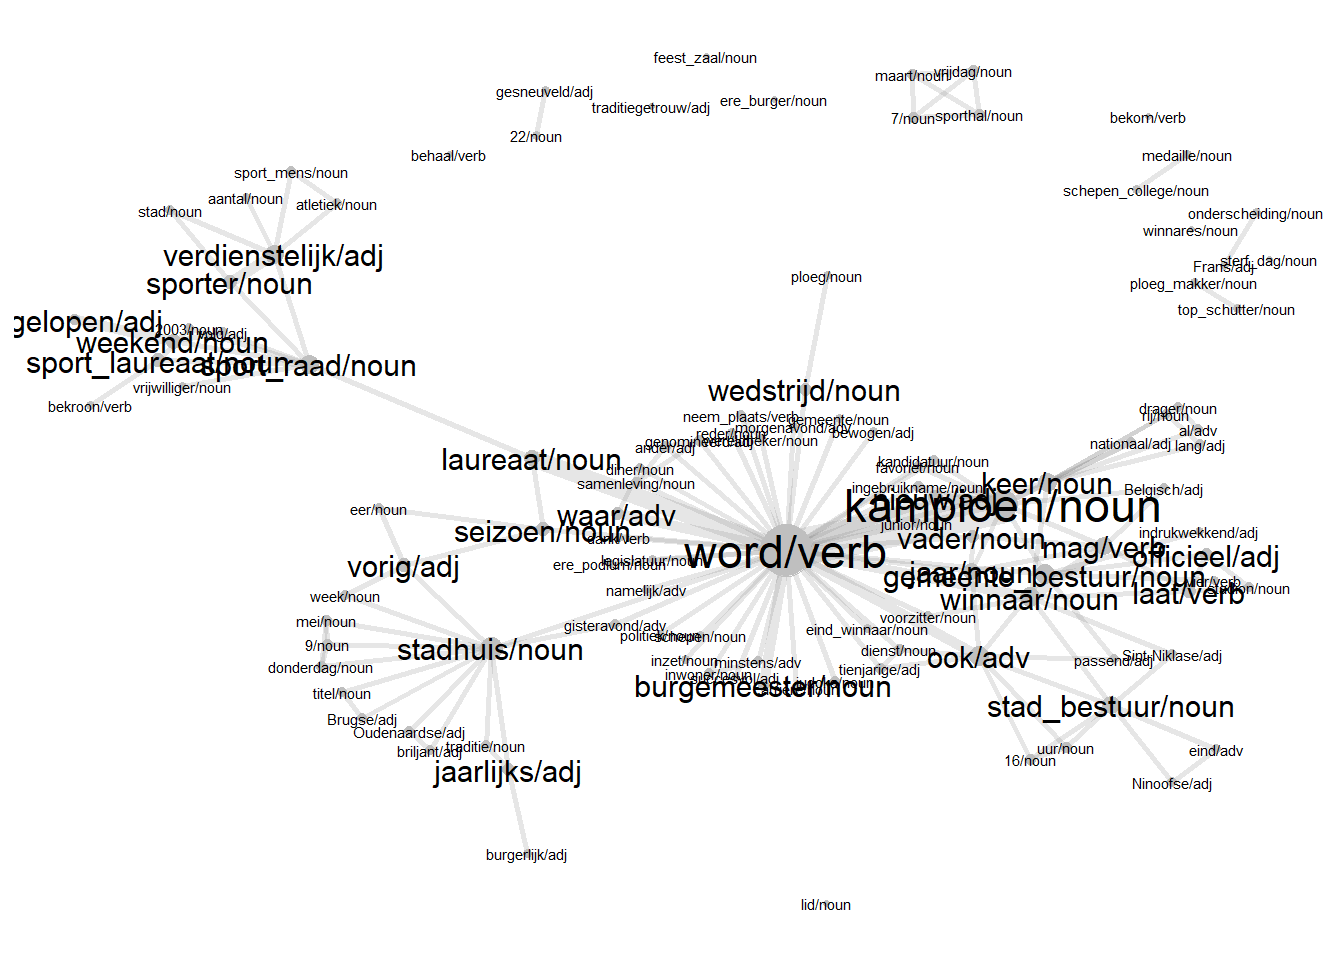 Network of context words of the huldigen `to honour’ cluster.